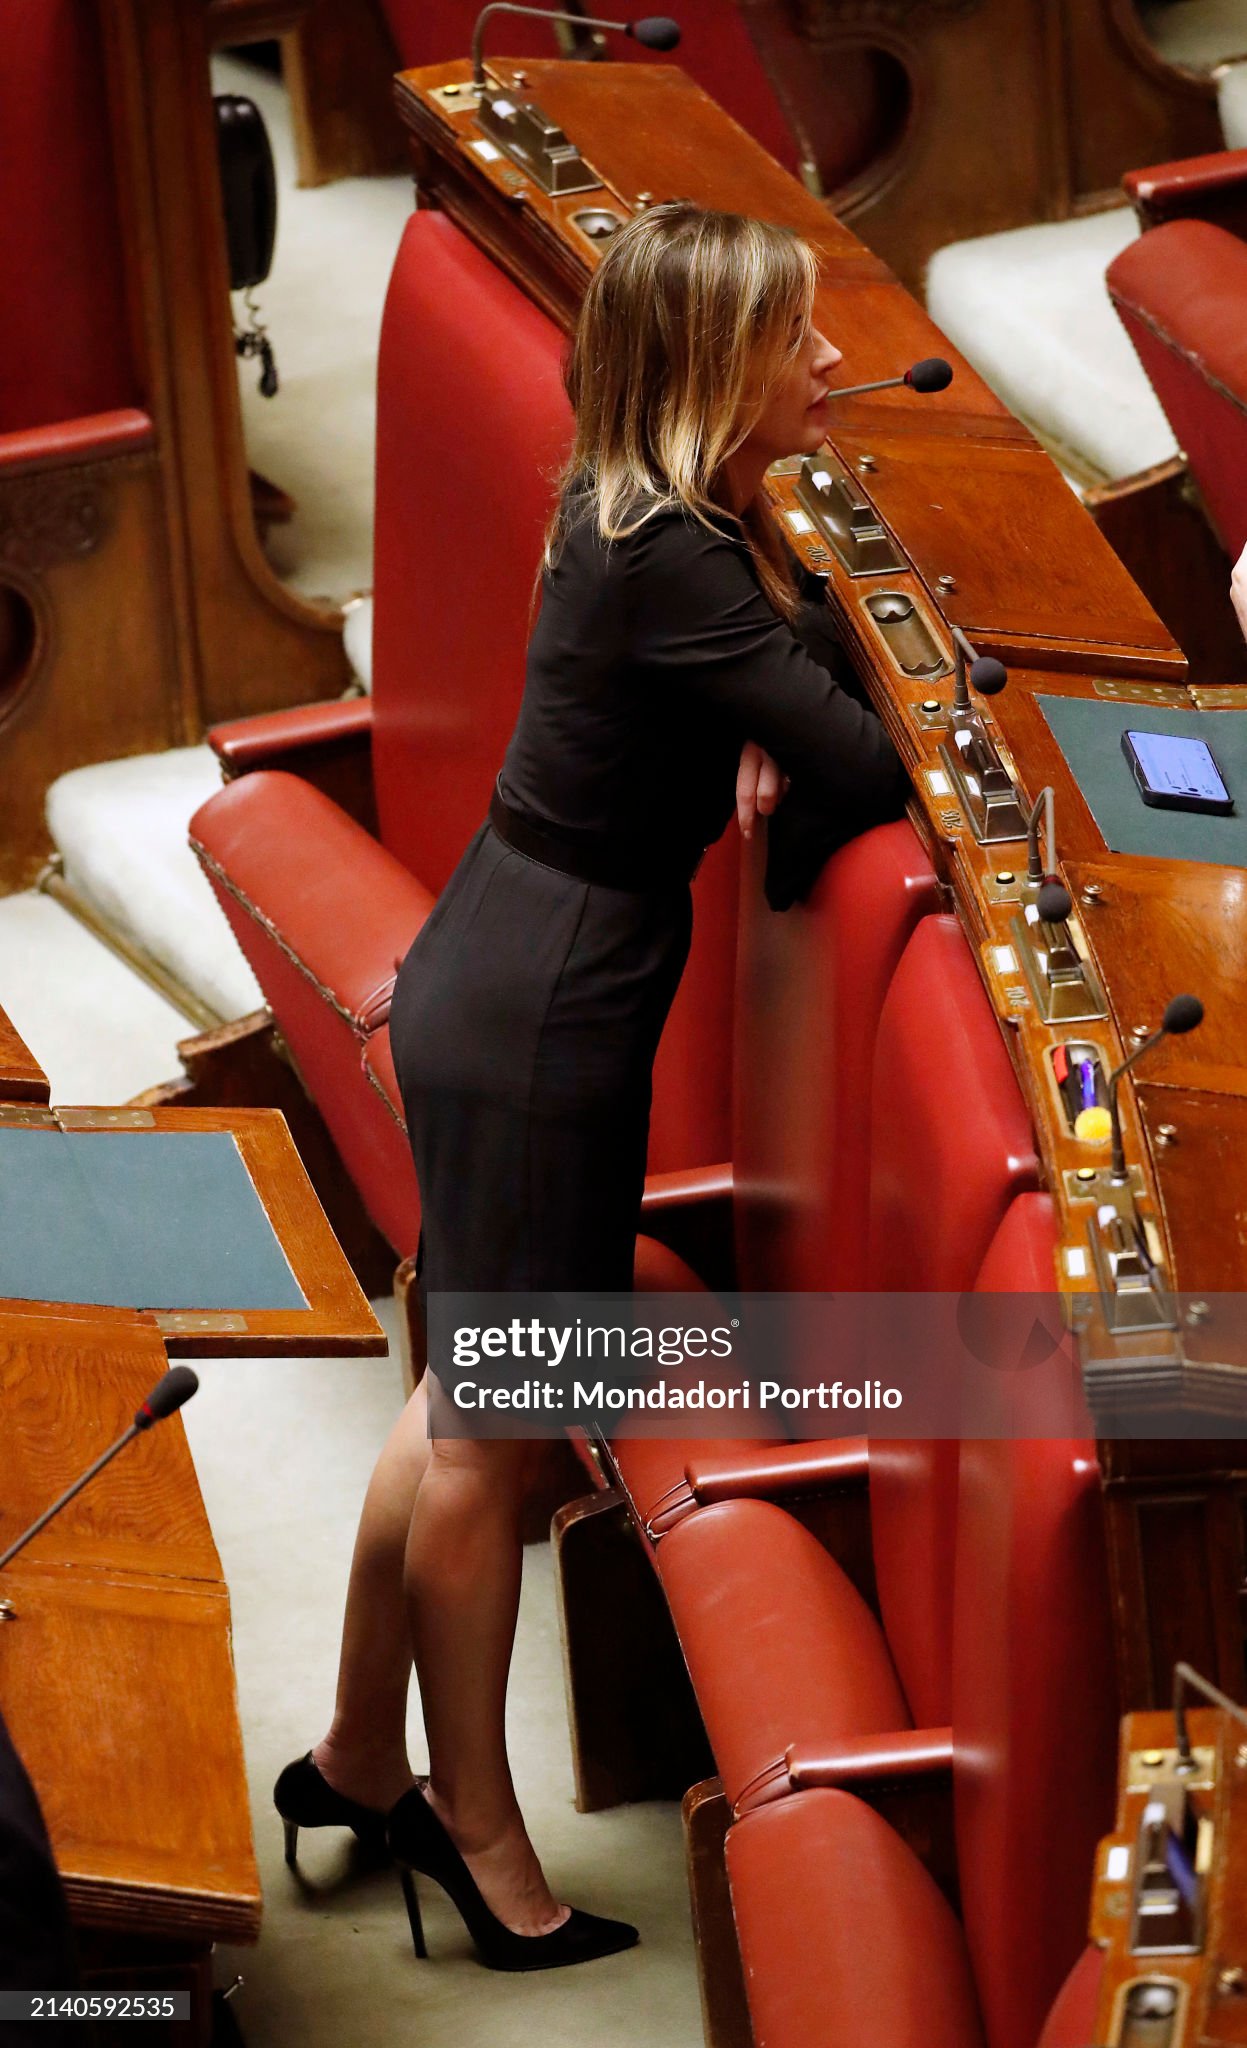 member-of-the-chamber-of-deputies-of-the-republic-of-italy-maria-elena-boschi-during-the.jpg